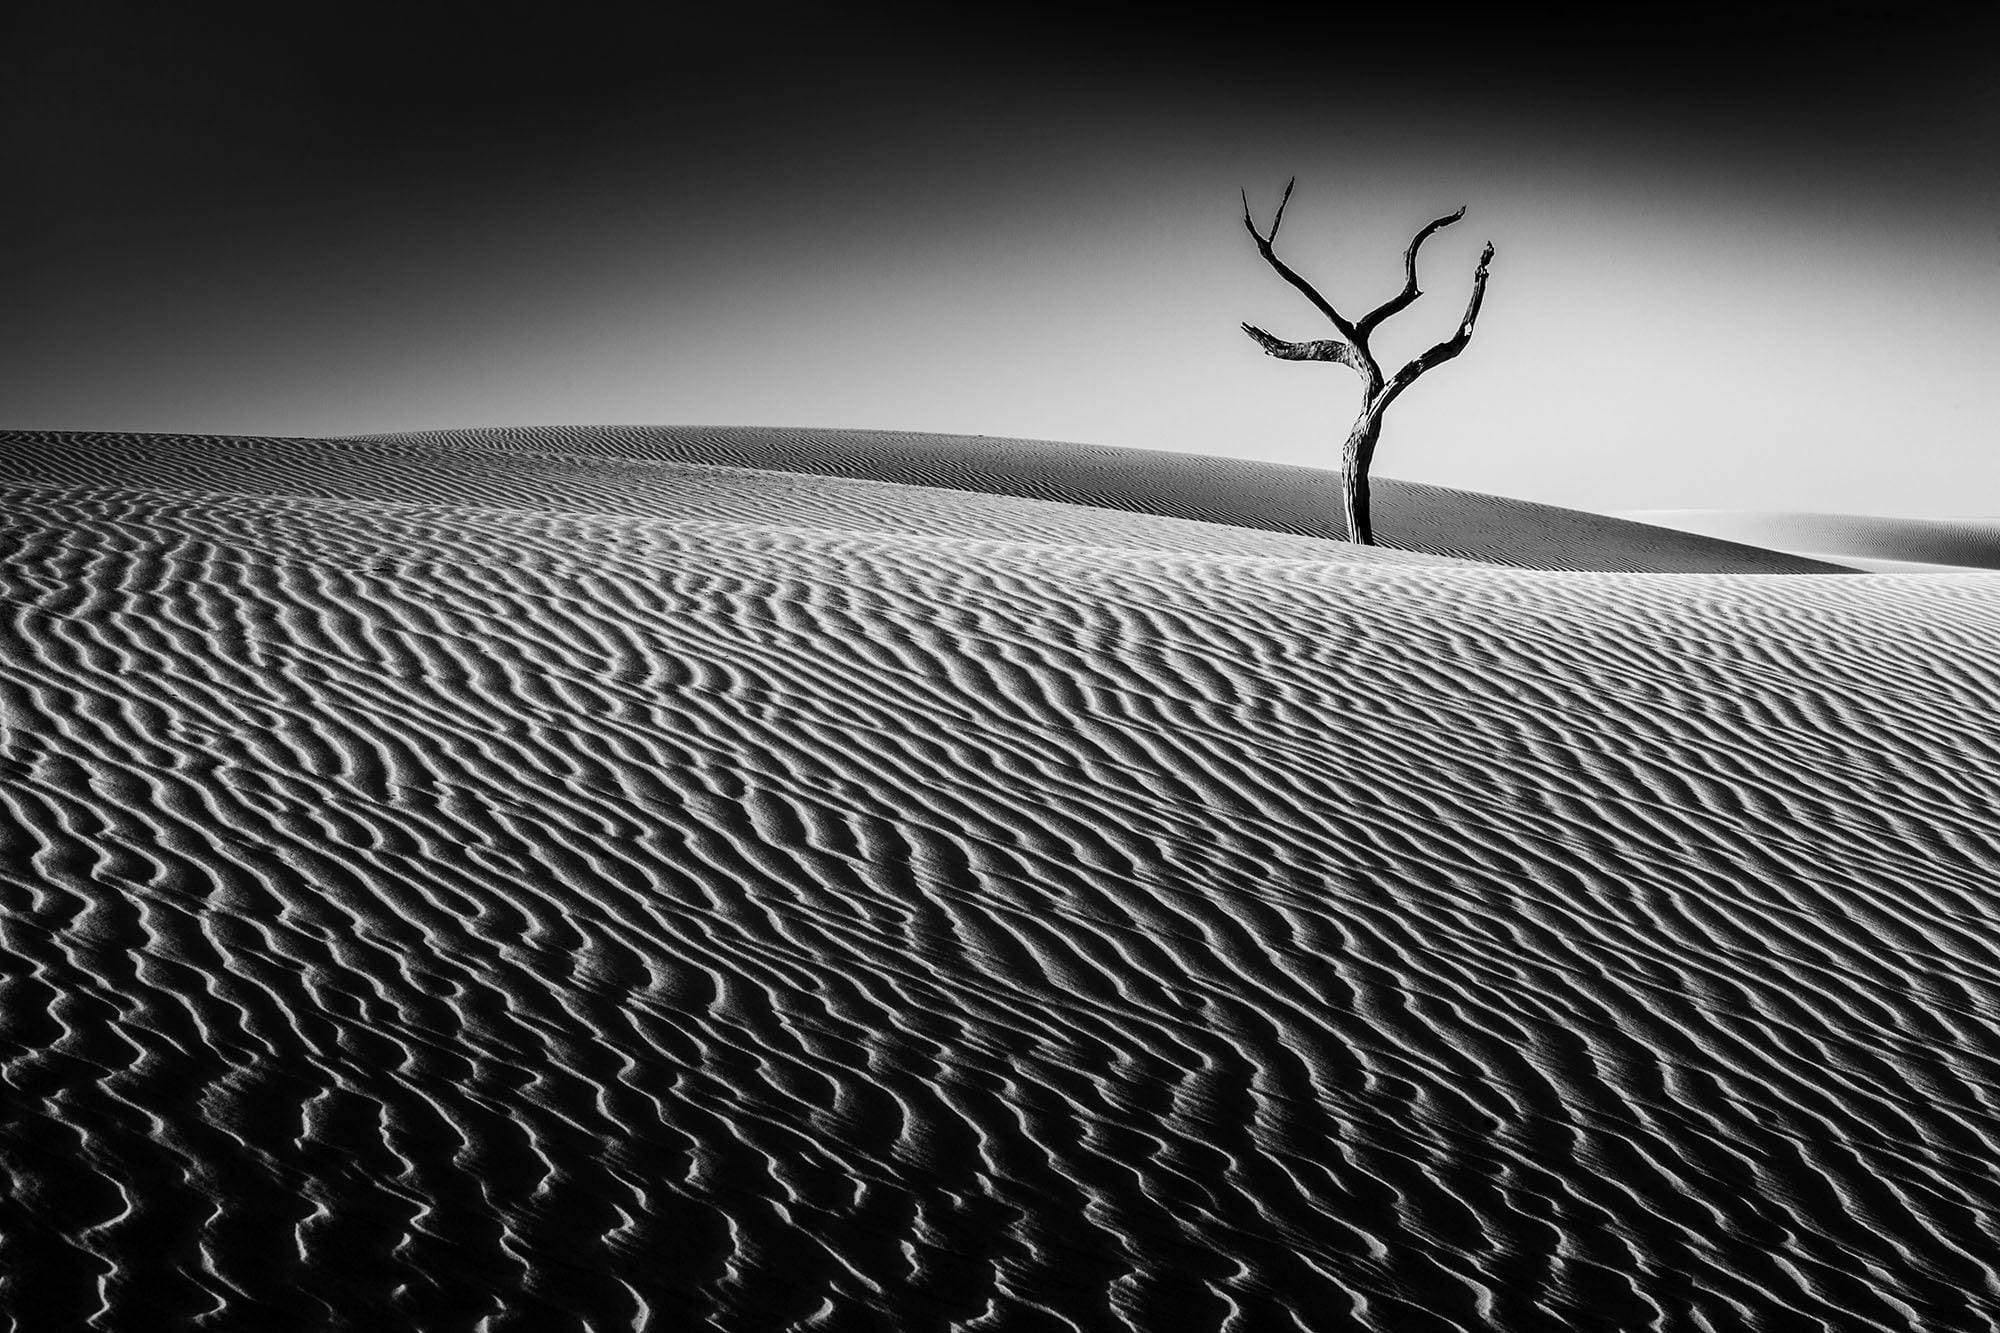 Dark shadowy view of a desert with thick lines and an empty tree in the background, Lone Tree - Fraser Island QLD